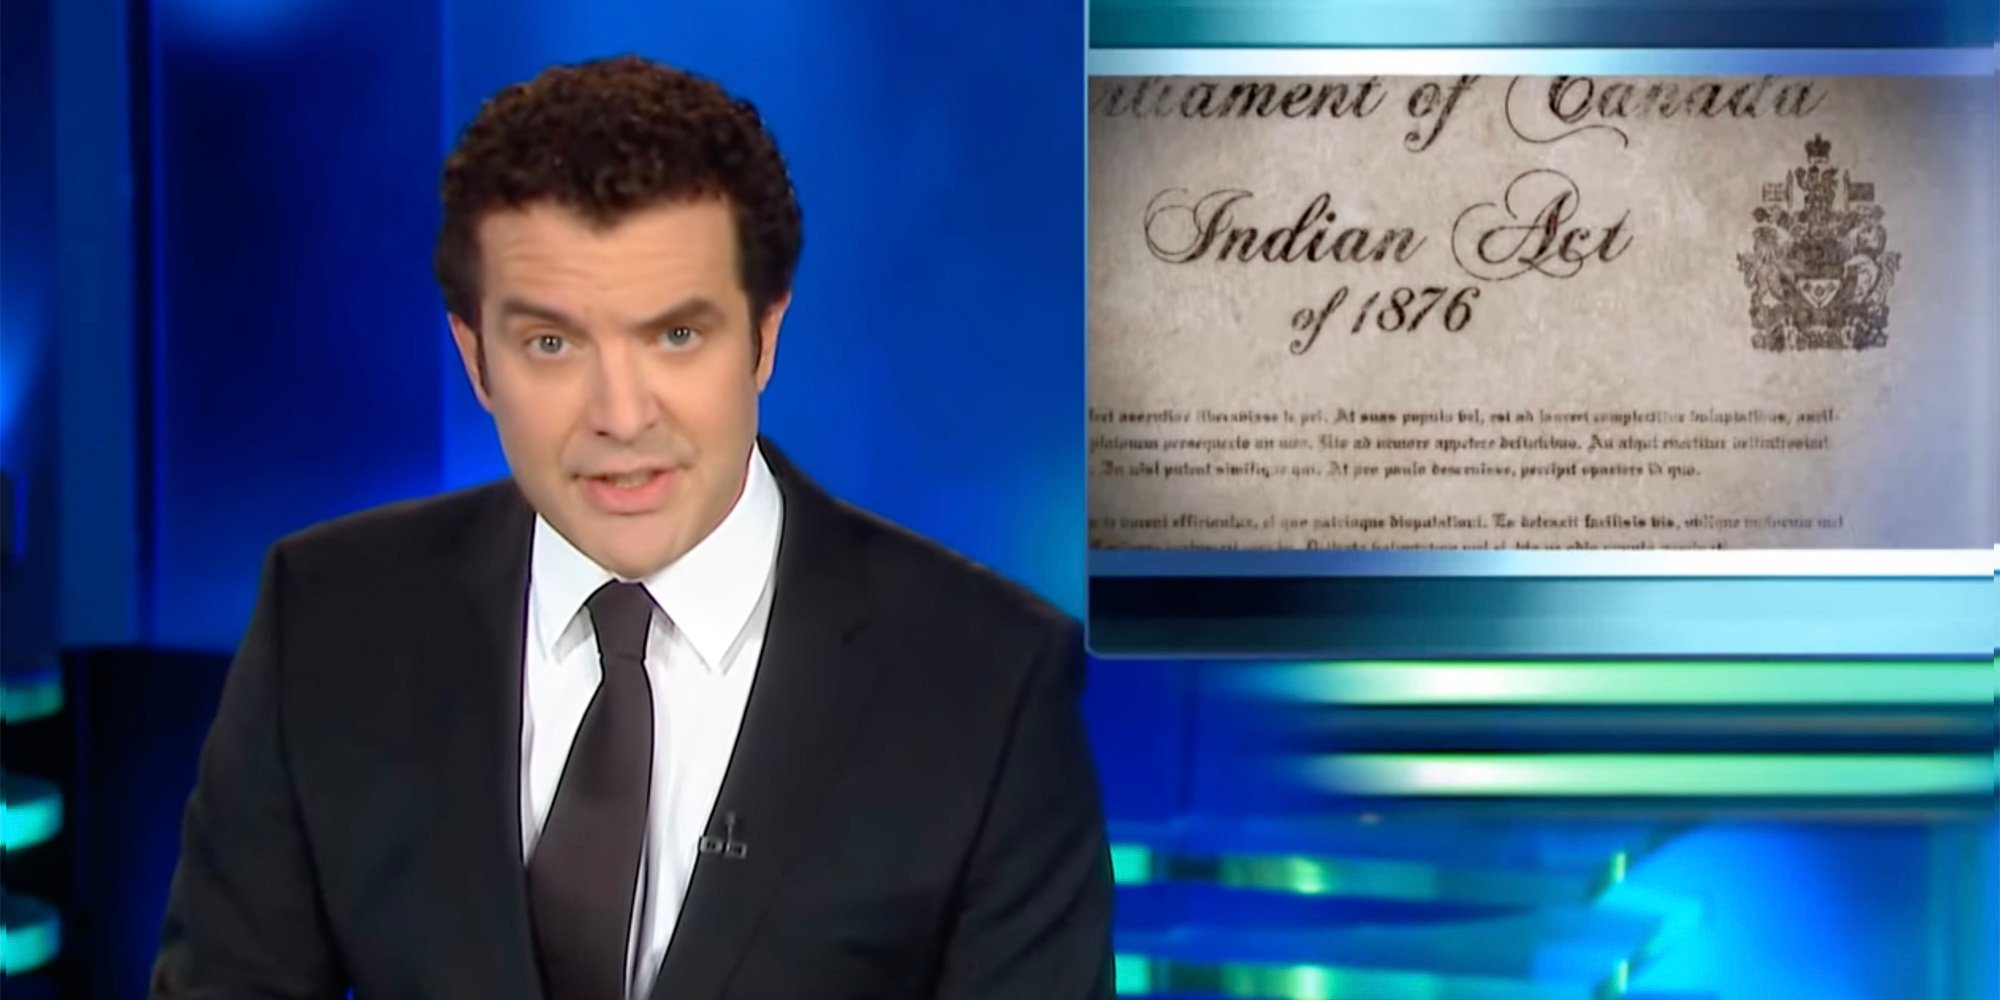 Rick Mercer and the Indian Act